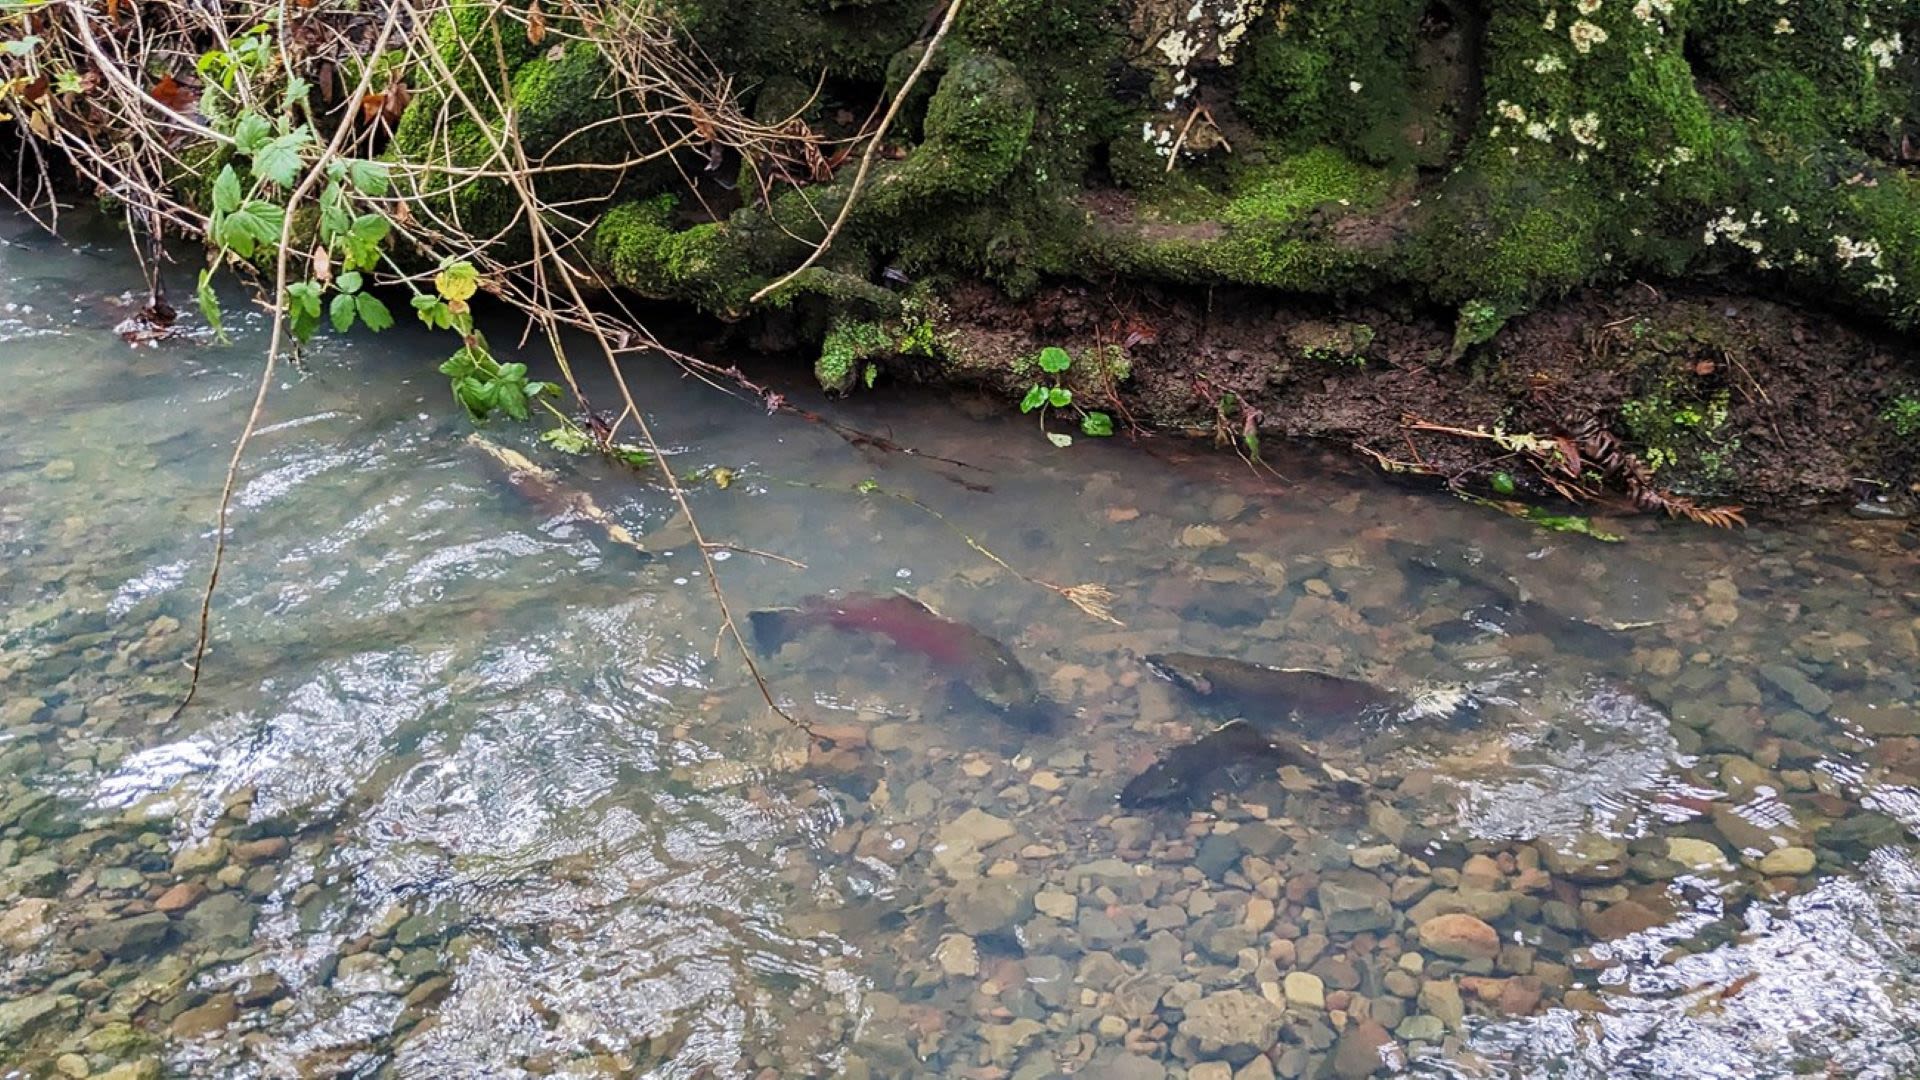 Scientists report 'surprisingly strong return' of endangered salmon species: 'This is significant as we continue our goal of improving habitat in these watersheds'